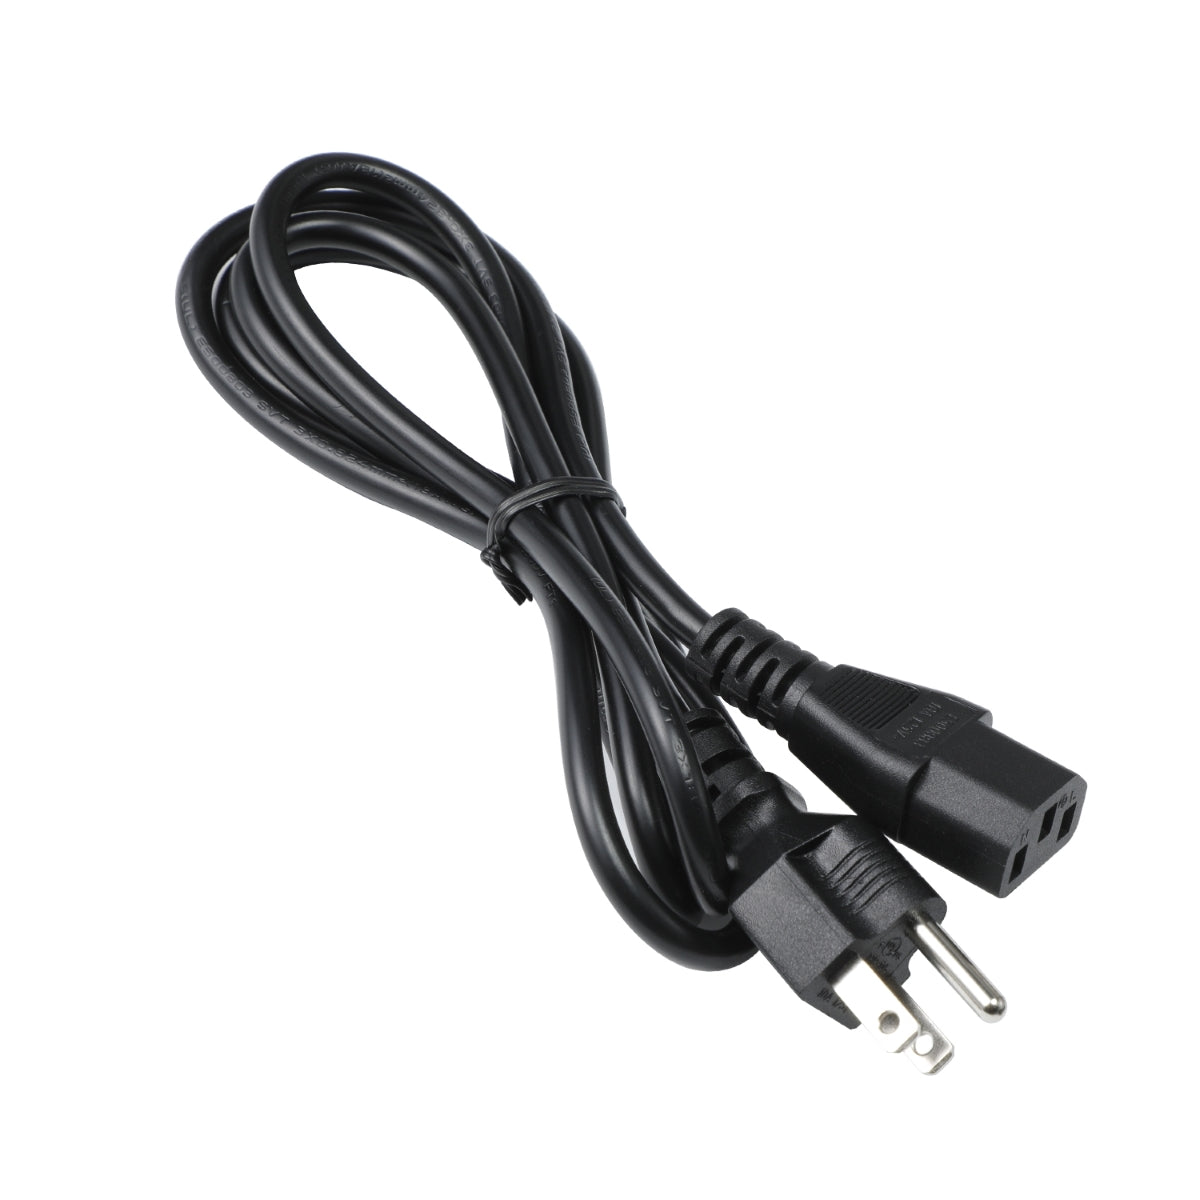 Power Cord for HP Pavilion 550-177c Computer.